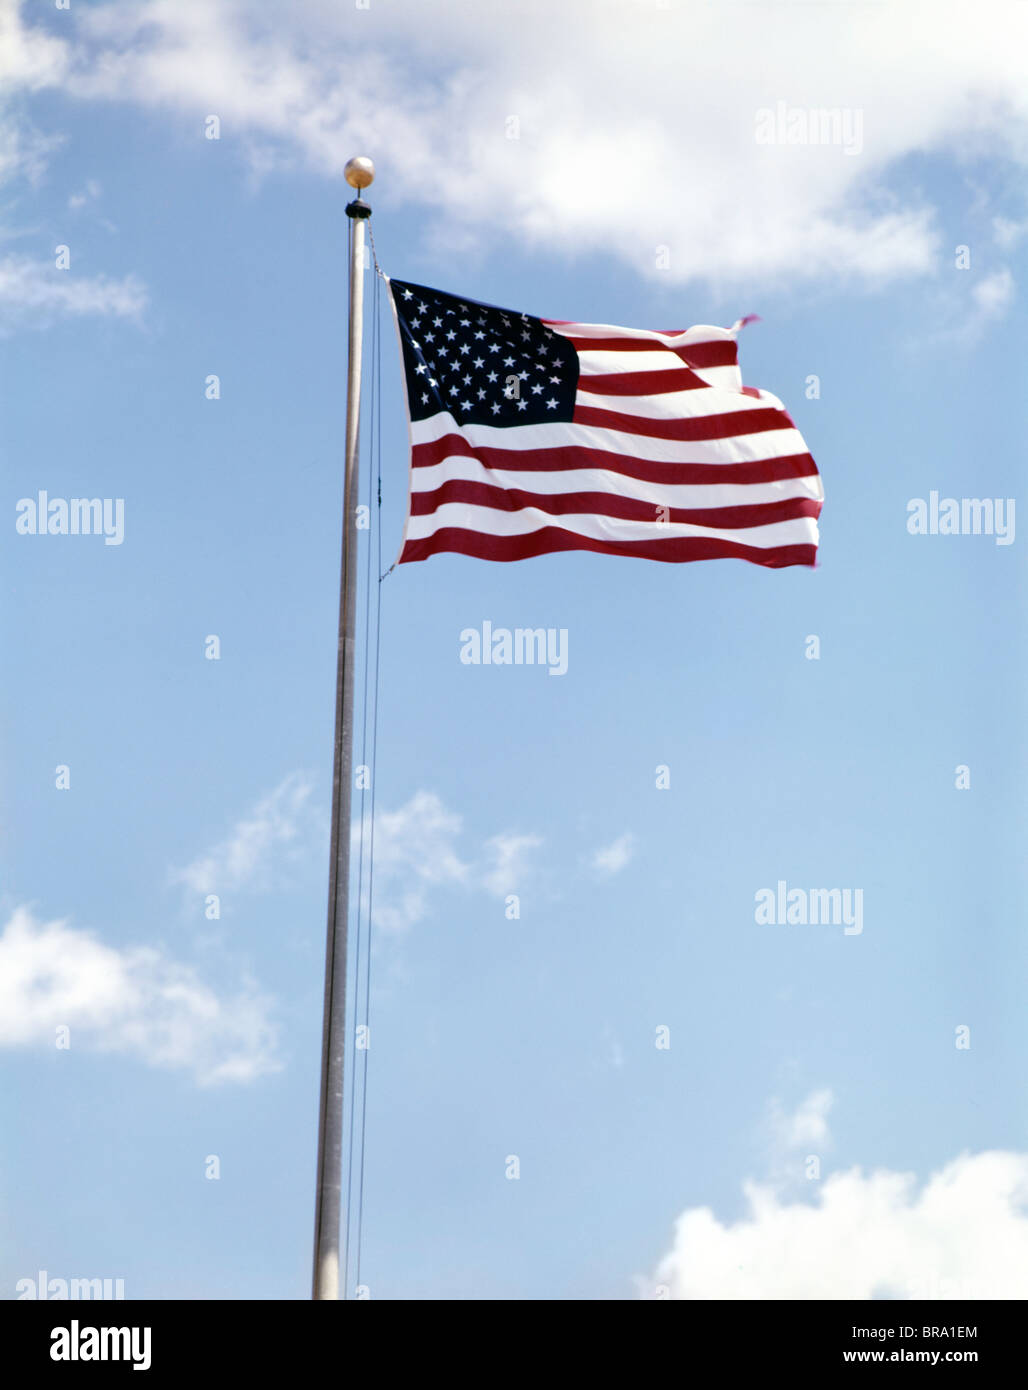 1960s AMERICAN FLAG ON POLE FLYING AGAINST BLUE SKY WITH CLOUDS Stock Photo